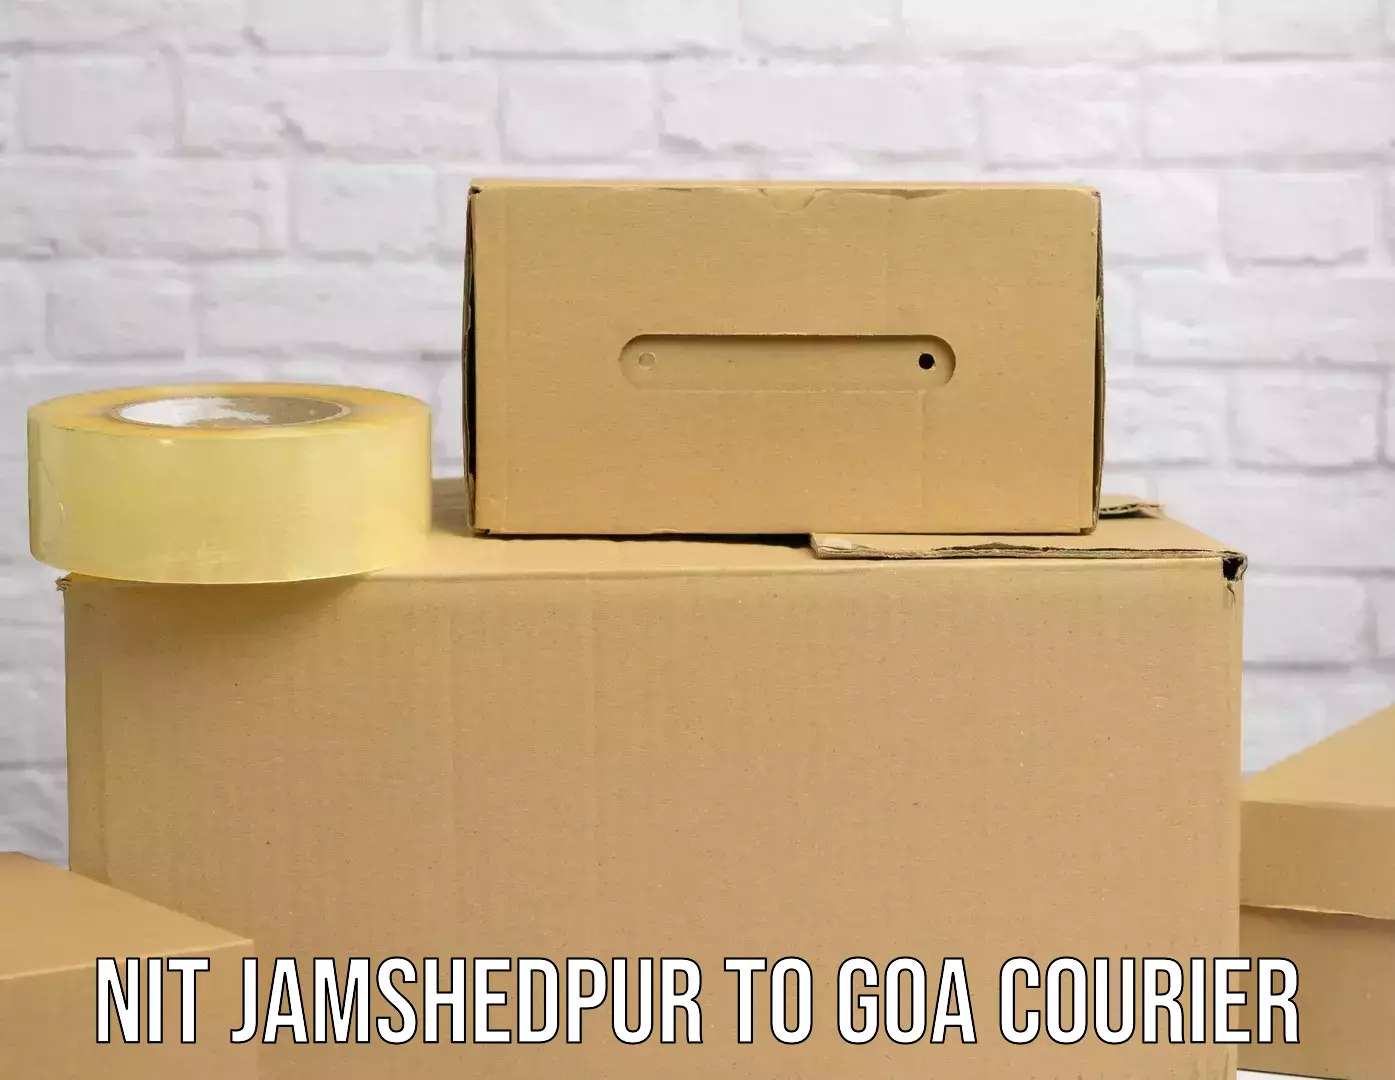 Premium delivery services NIT Jamshedpur to Goa